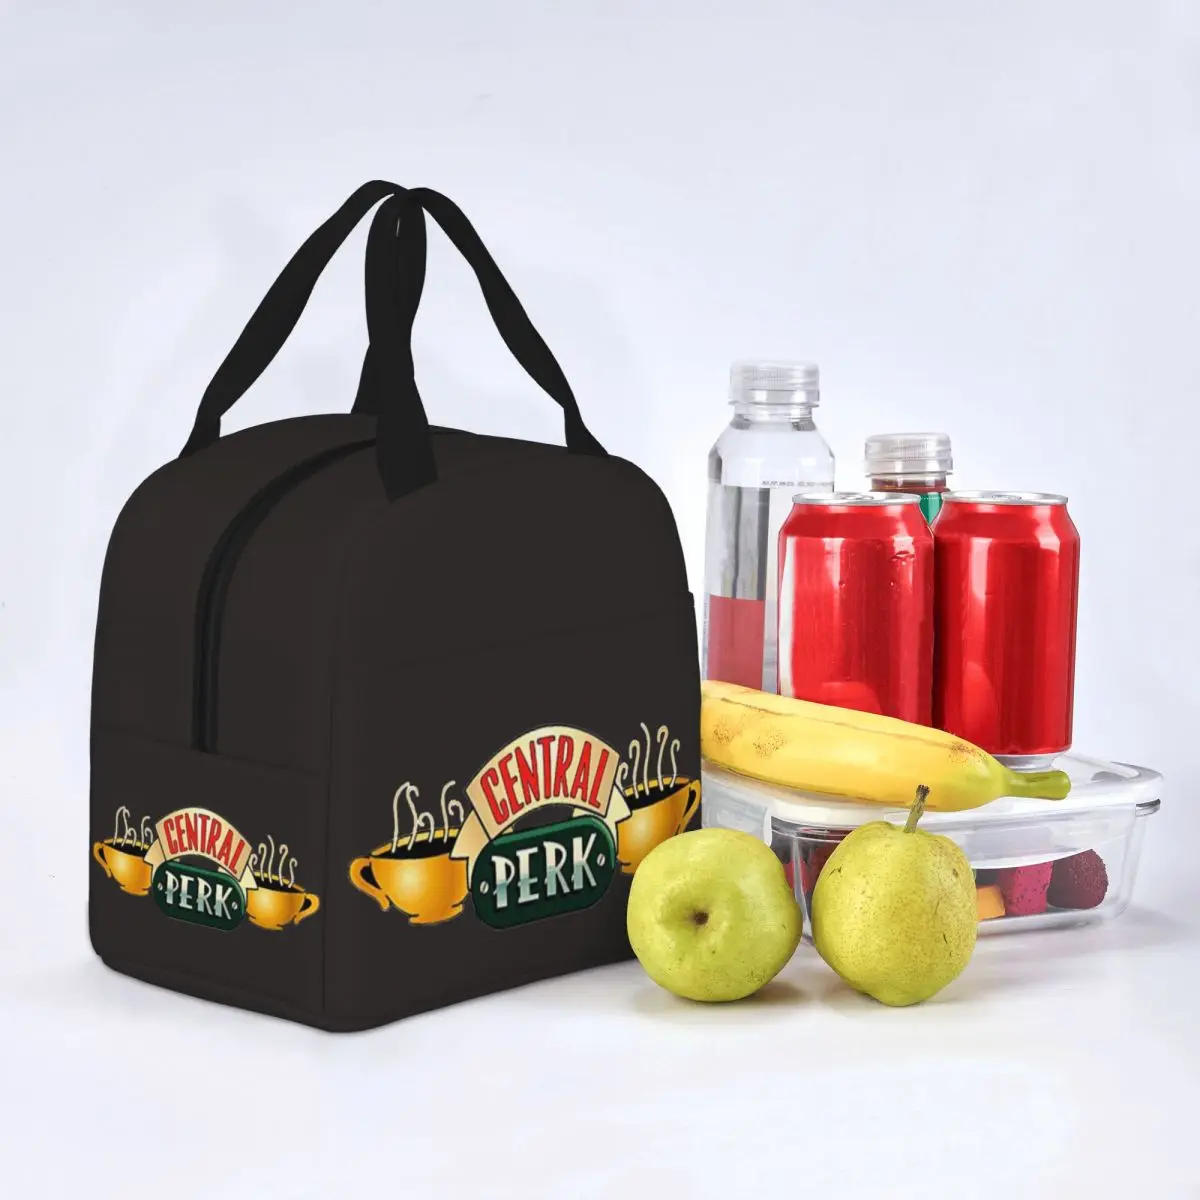 Pair Best Friends Central Park Insulated Lunch Bag Friends Tv Show Lunch Container Cooler Bag Tote Lunch Box Food Handbags